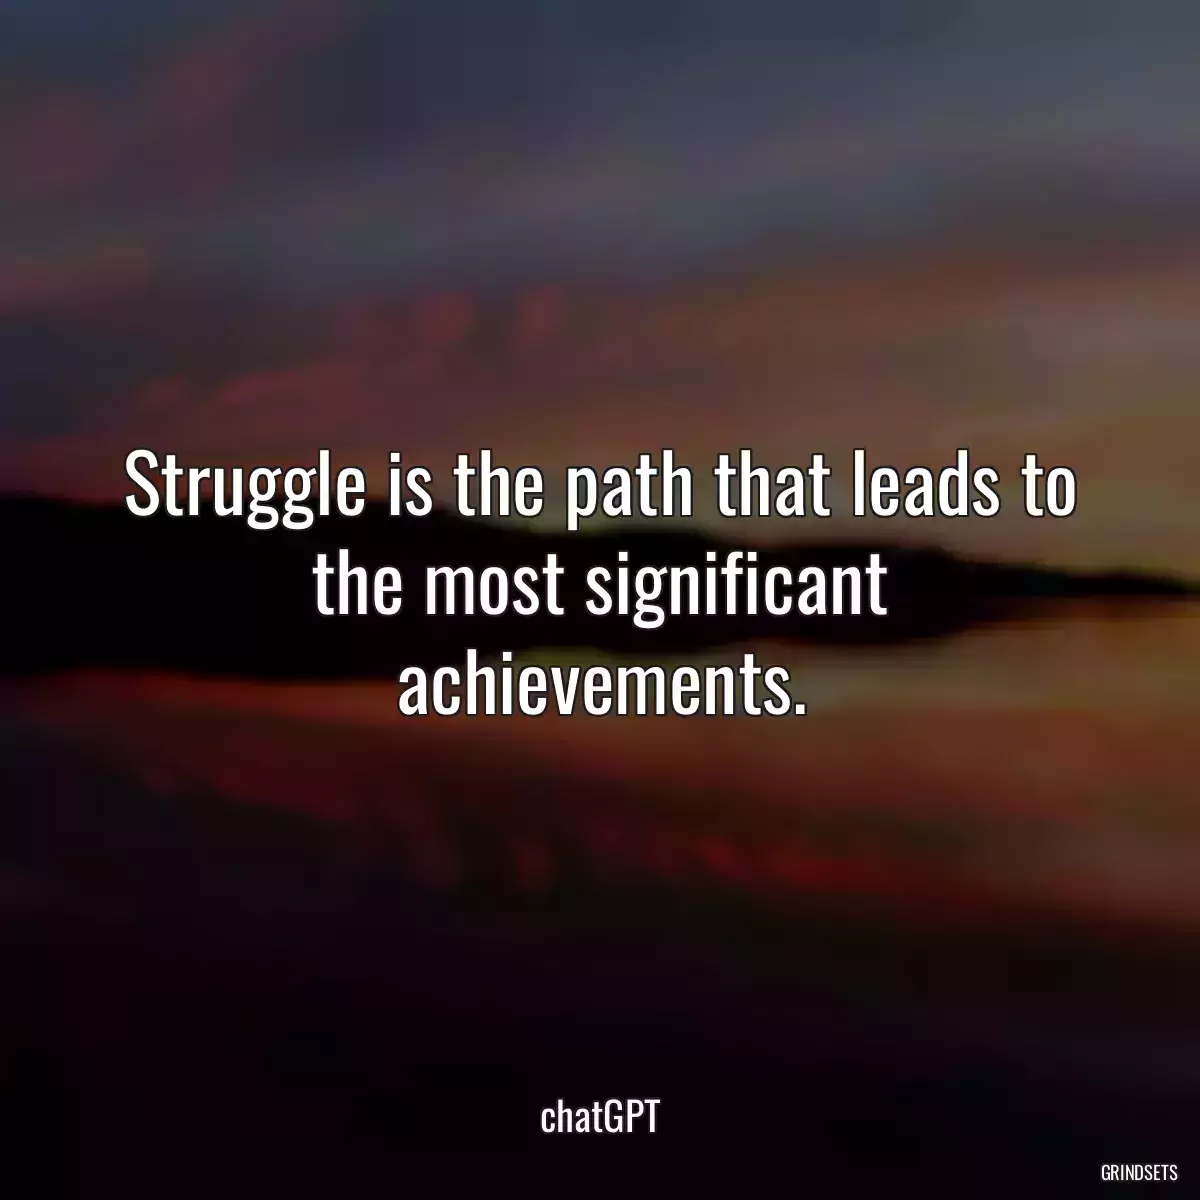 Struggle is the path that leads to the most significant achievements.